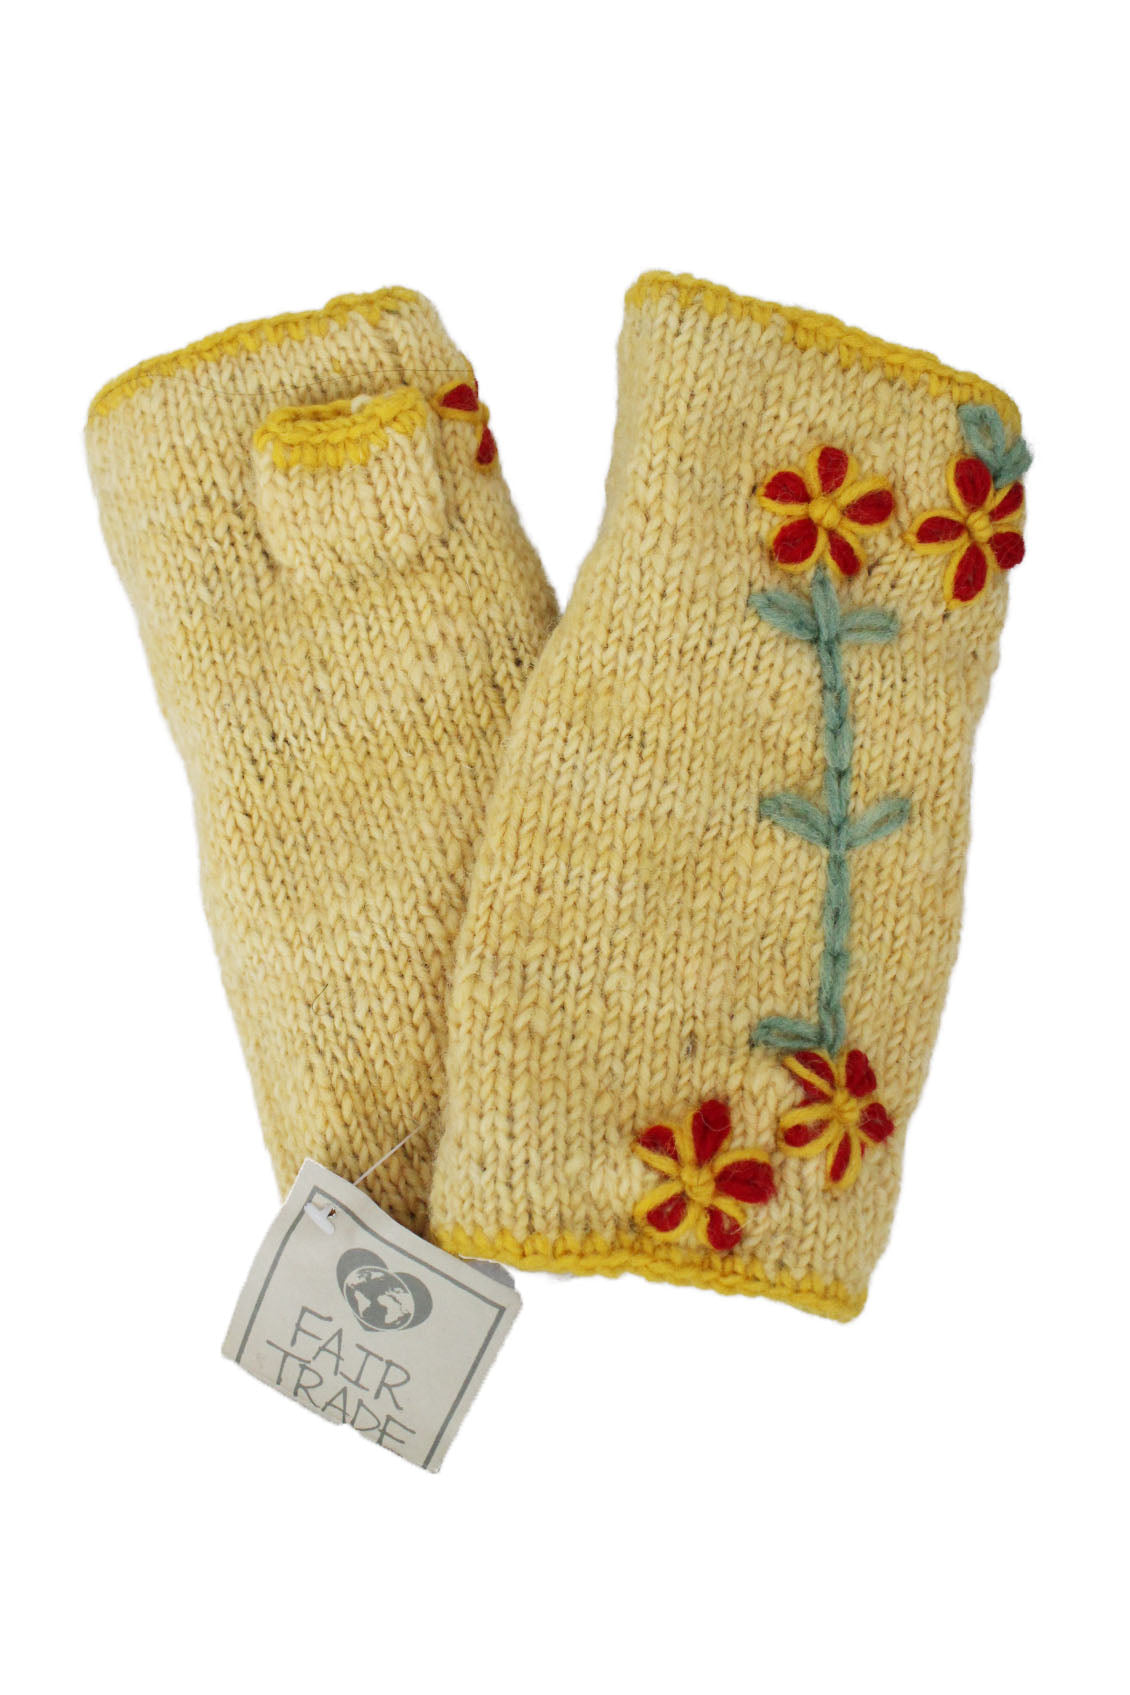 paths of the spirit yellow fingerless gloves. features yellow tonal knit design with 5 red and yellow flowers on each glove